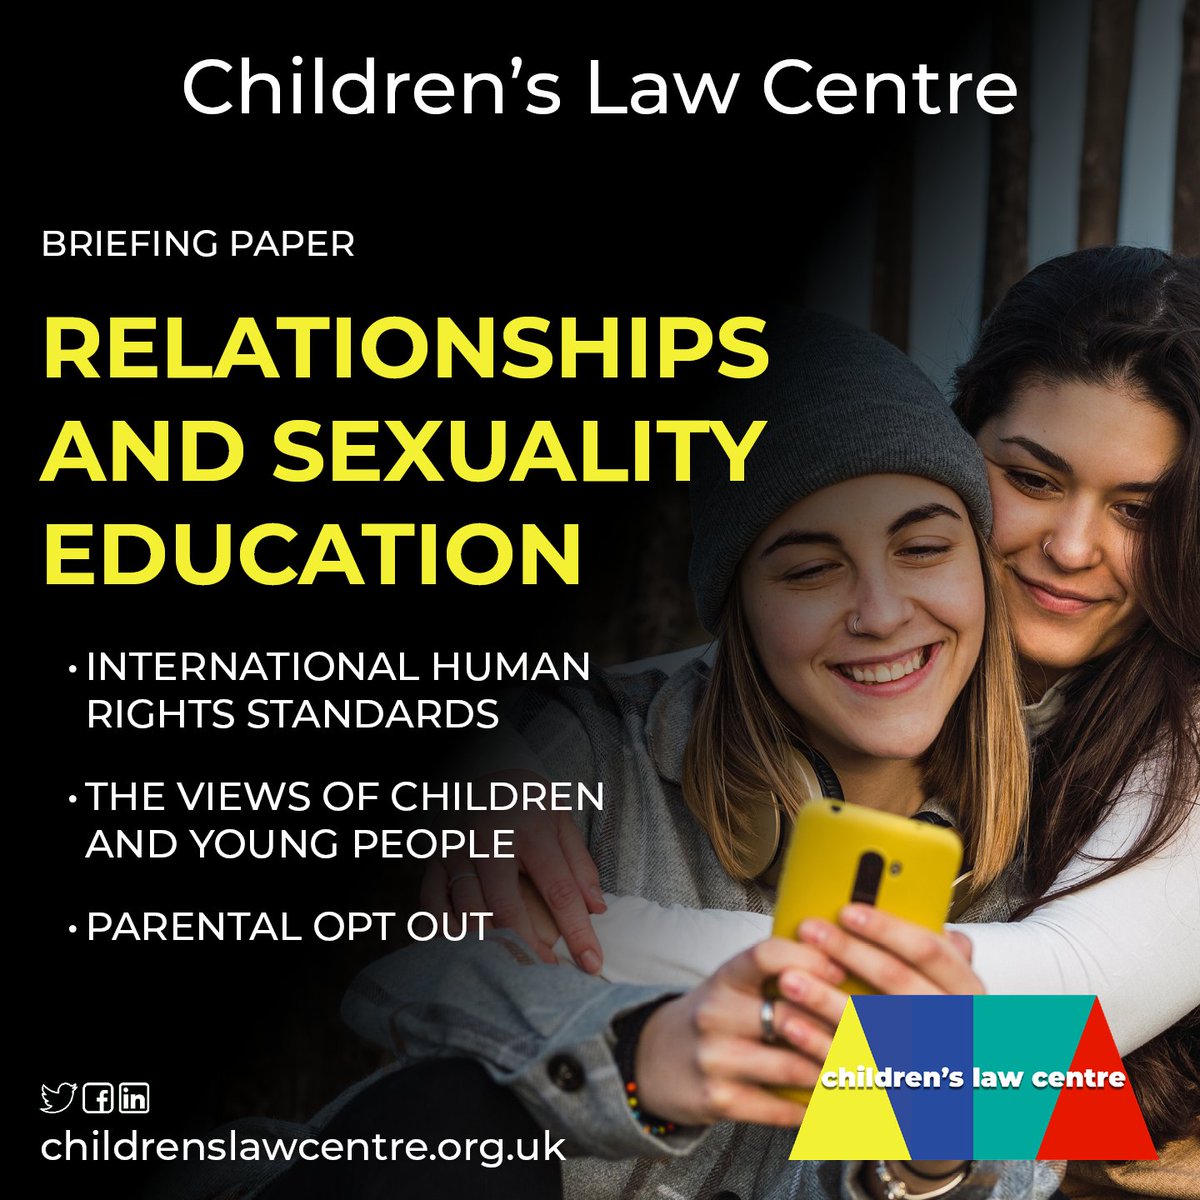 Don't get caught up in the misinformation around Relationships and Sexuality Education (RSE). Our briefing paper offers factual and researched information on everything from the views of young people to the issues around parental opt outs. Read it at childrenslawcentre.org.uk/?mdocs-file=71…